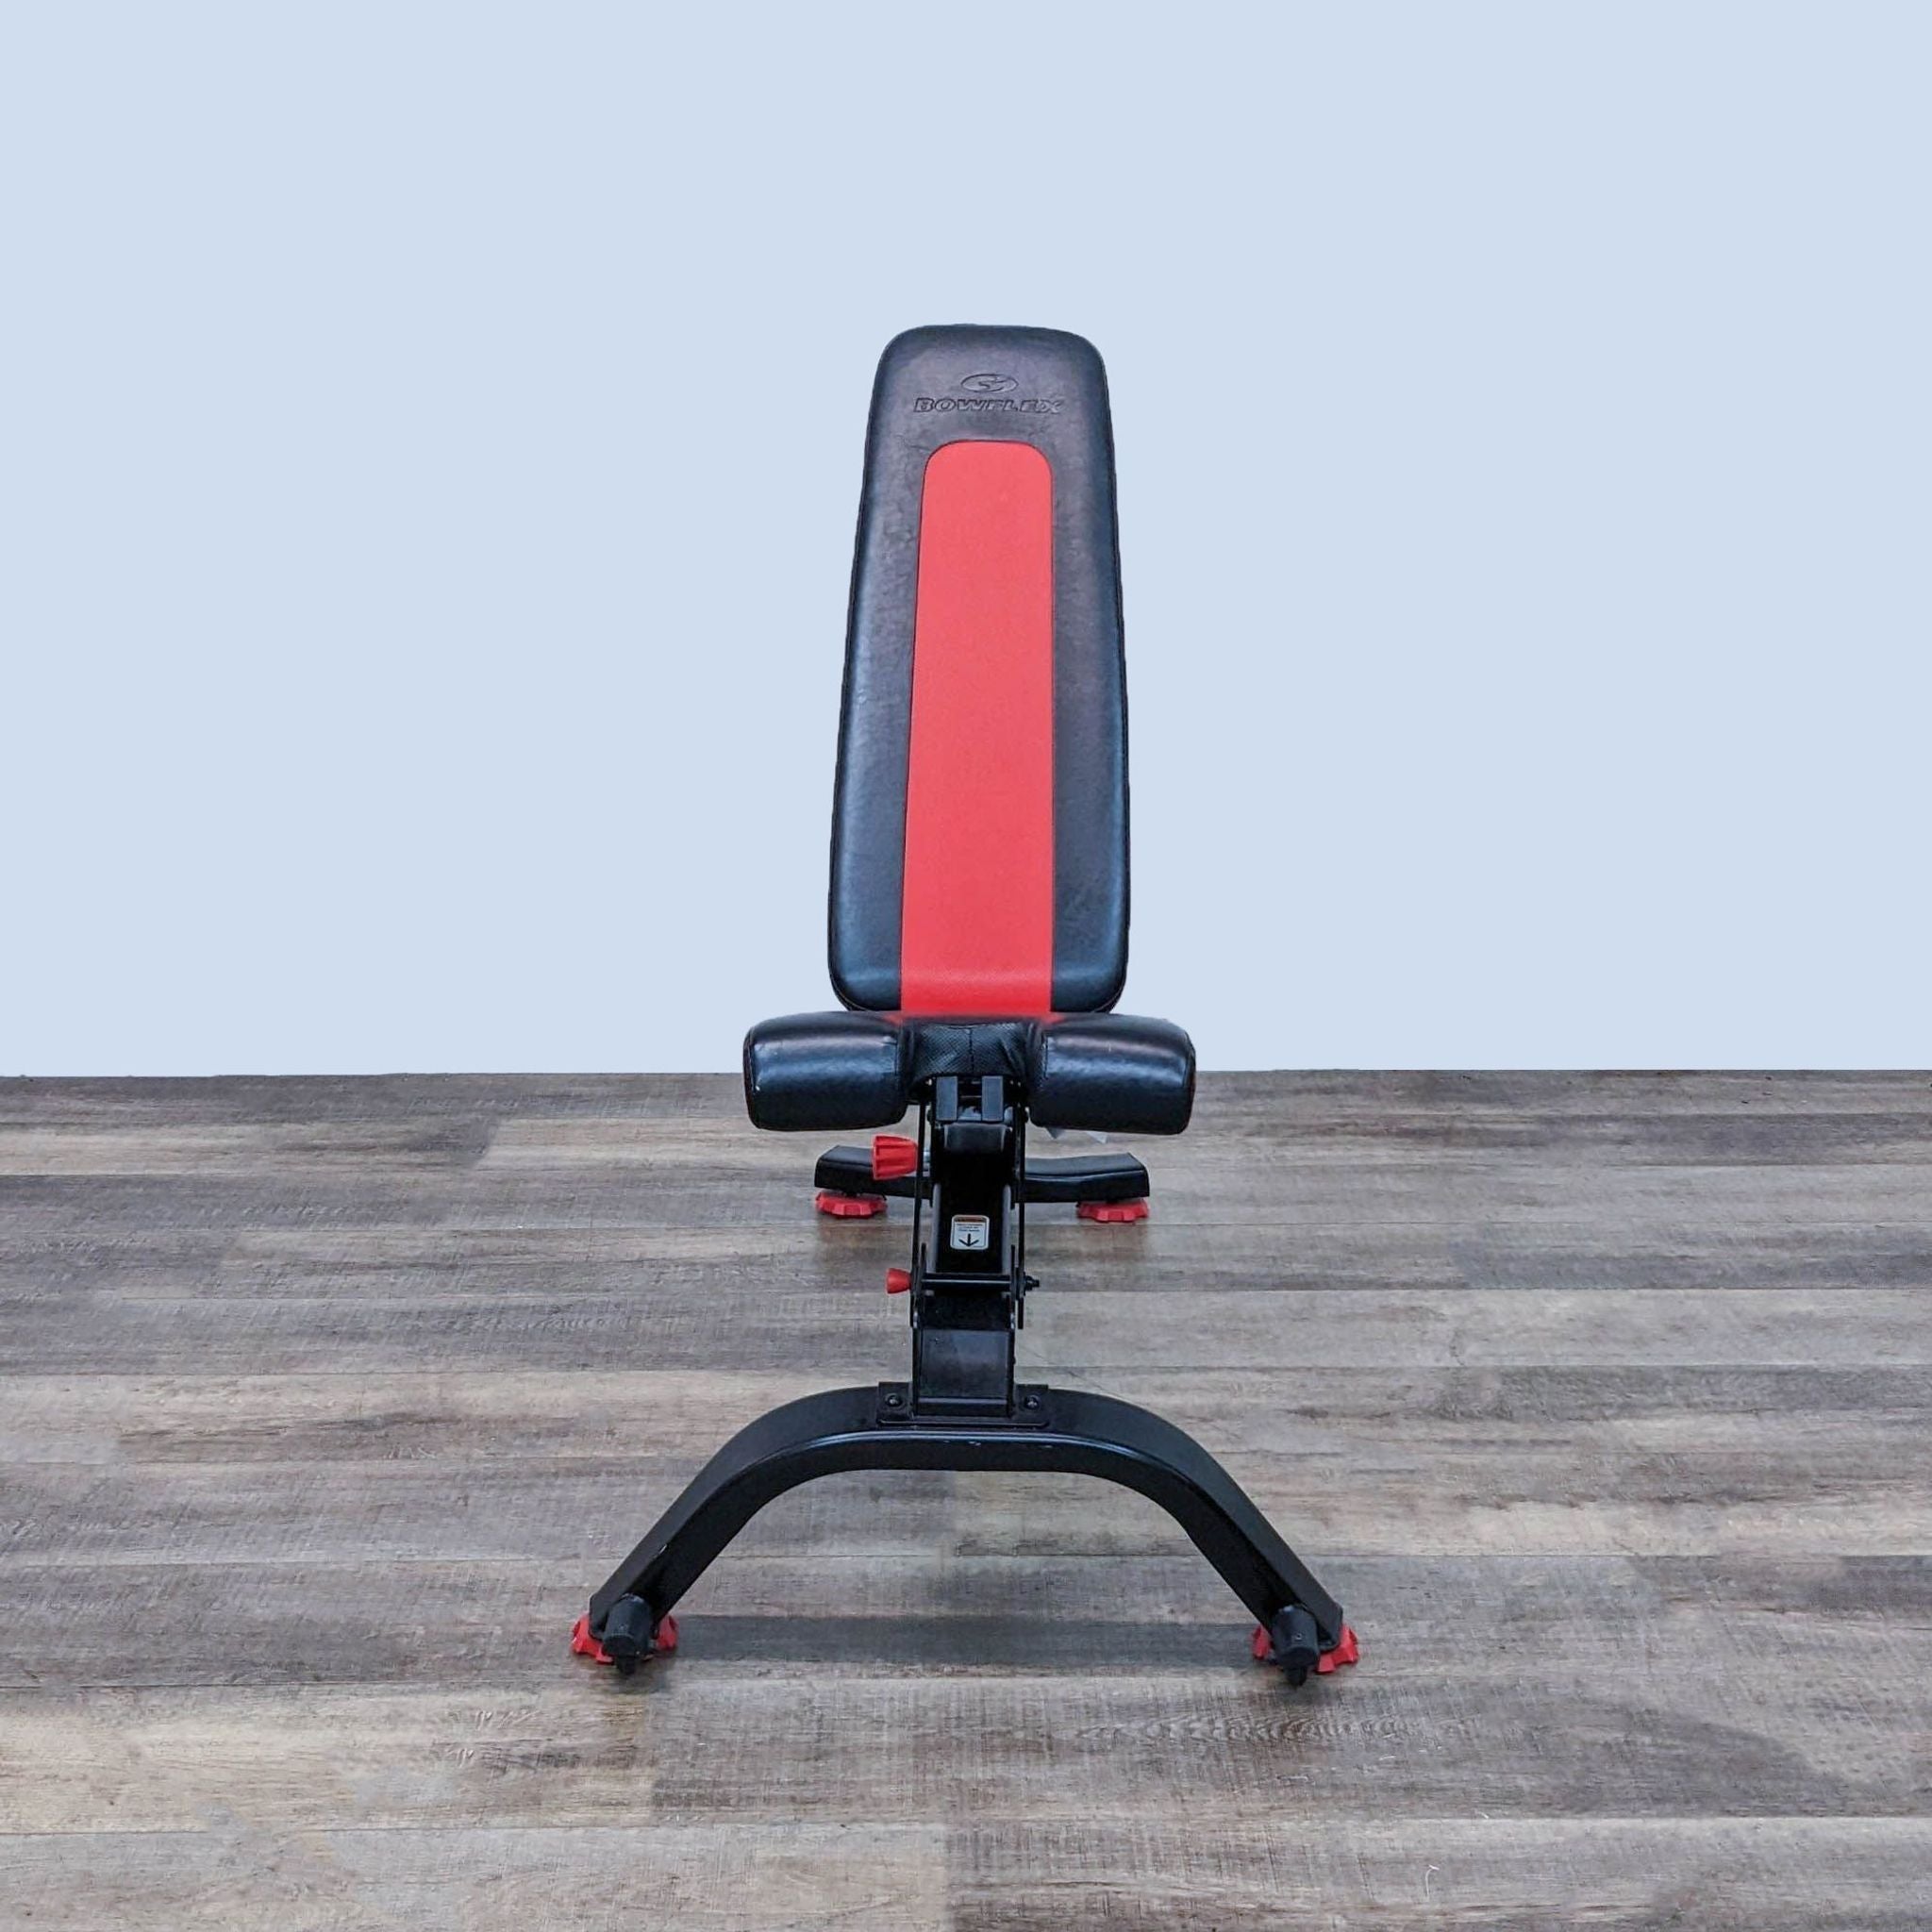 Alt text 1: Bowflex workout bench in an upright position on a wooden floor, showcasing the brand logo and red and black design.